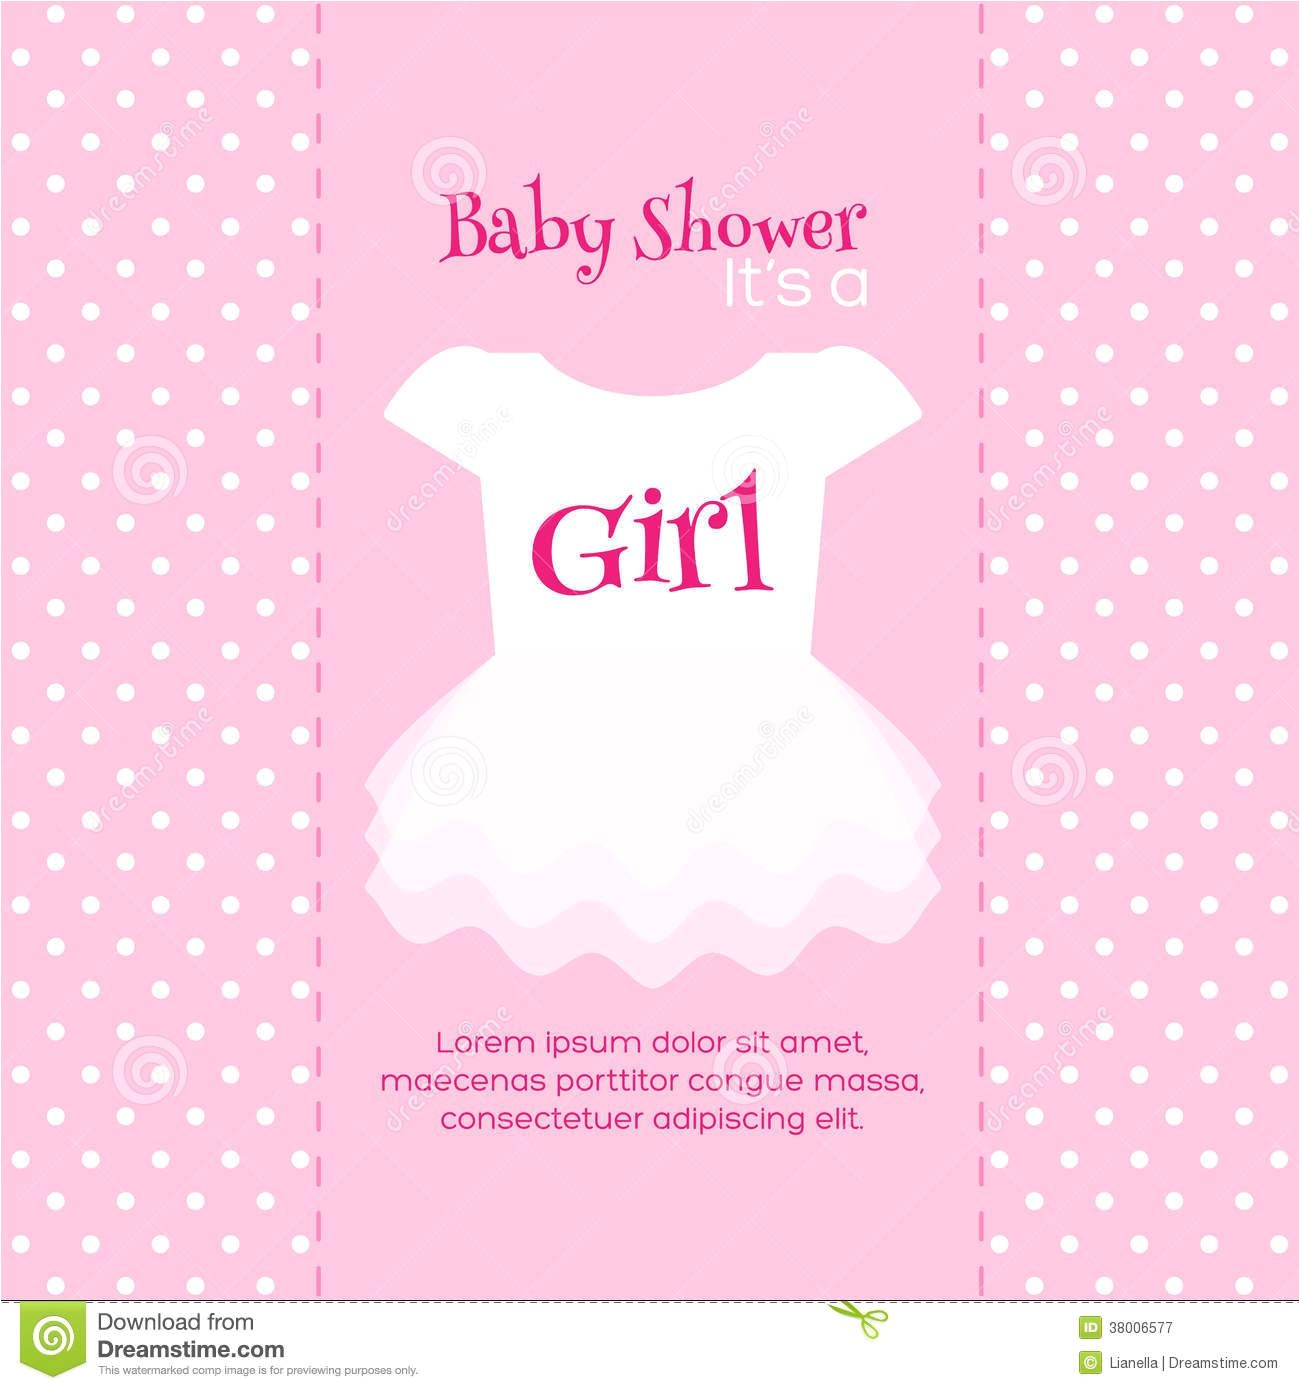 Baby Shower Invitations Layouts Baby Shower Invitations Cards Designs Free Baby Shower